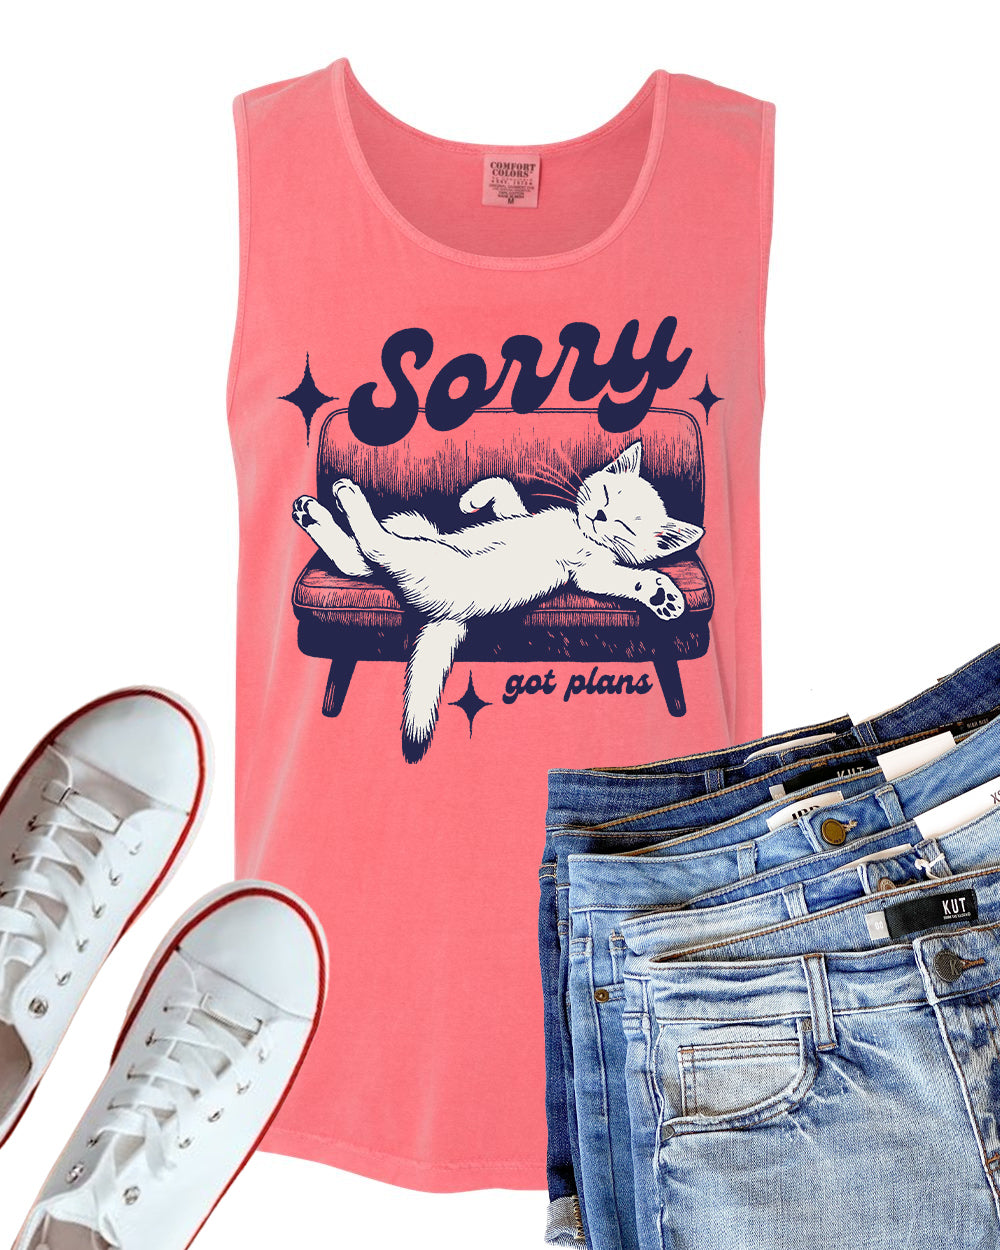 Sorry Got Plans Graphic Tee